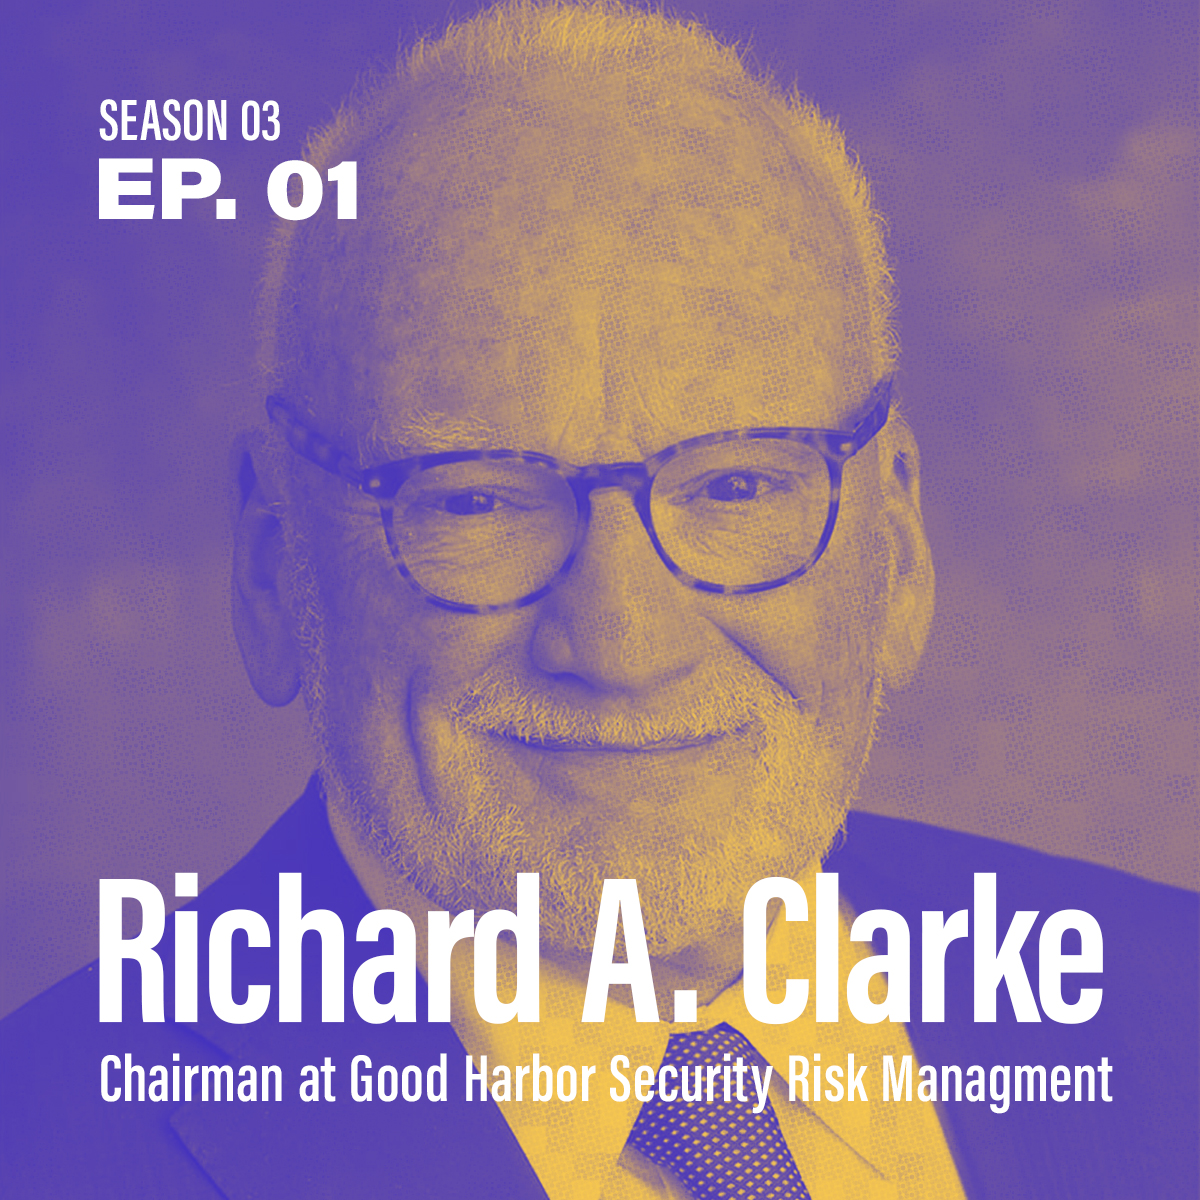 Season 3, Episode 1 - "Should Fortune 100s trust the cloud?" with Richard A Clarke, CEO @ Good Harbor